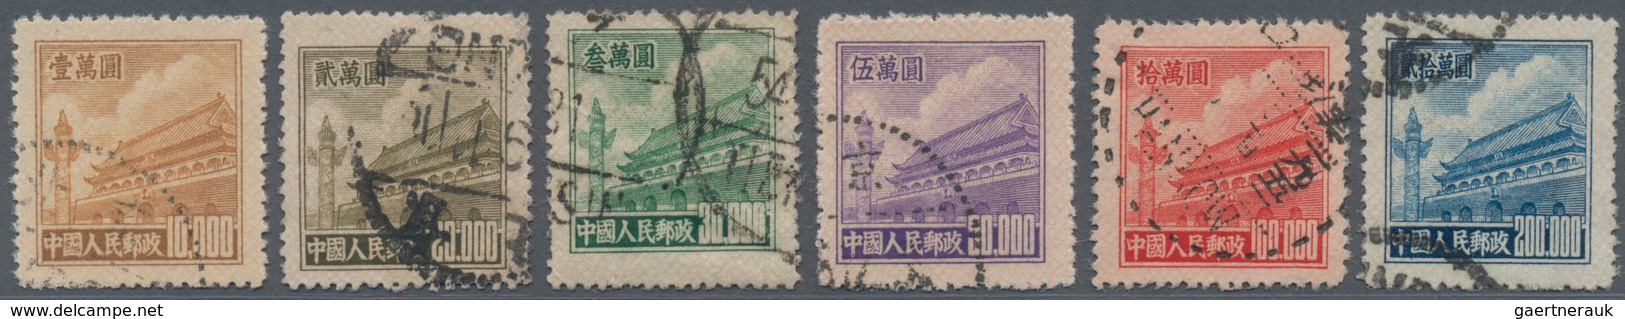 China - Volksrepublik: 1951, Tiananmen Definitives R5, Used, $30000 With Slight Creases, Otherwise F - Briefe U. Dokumente